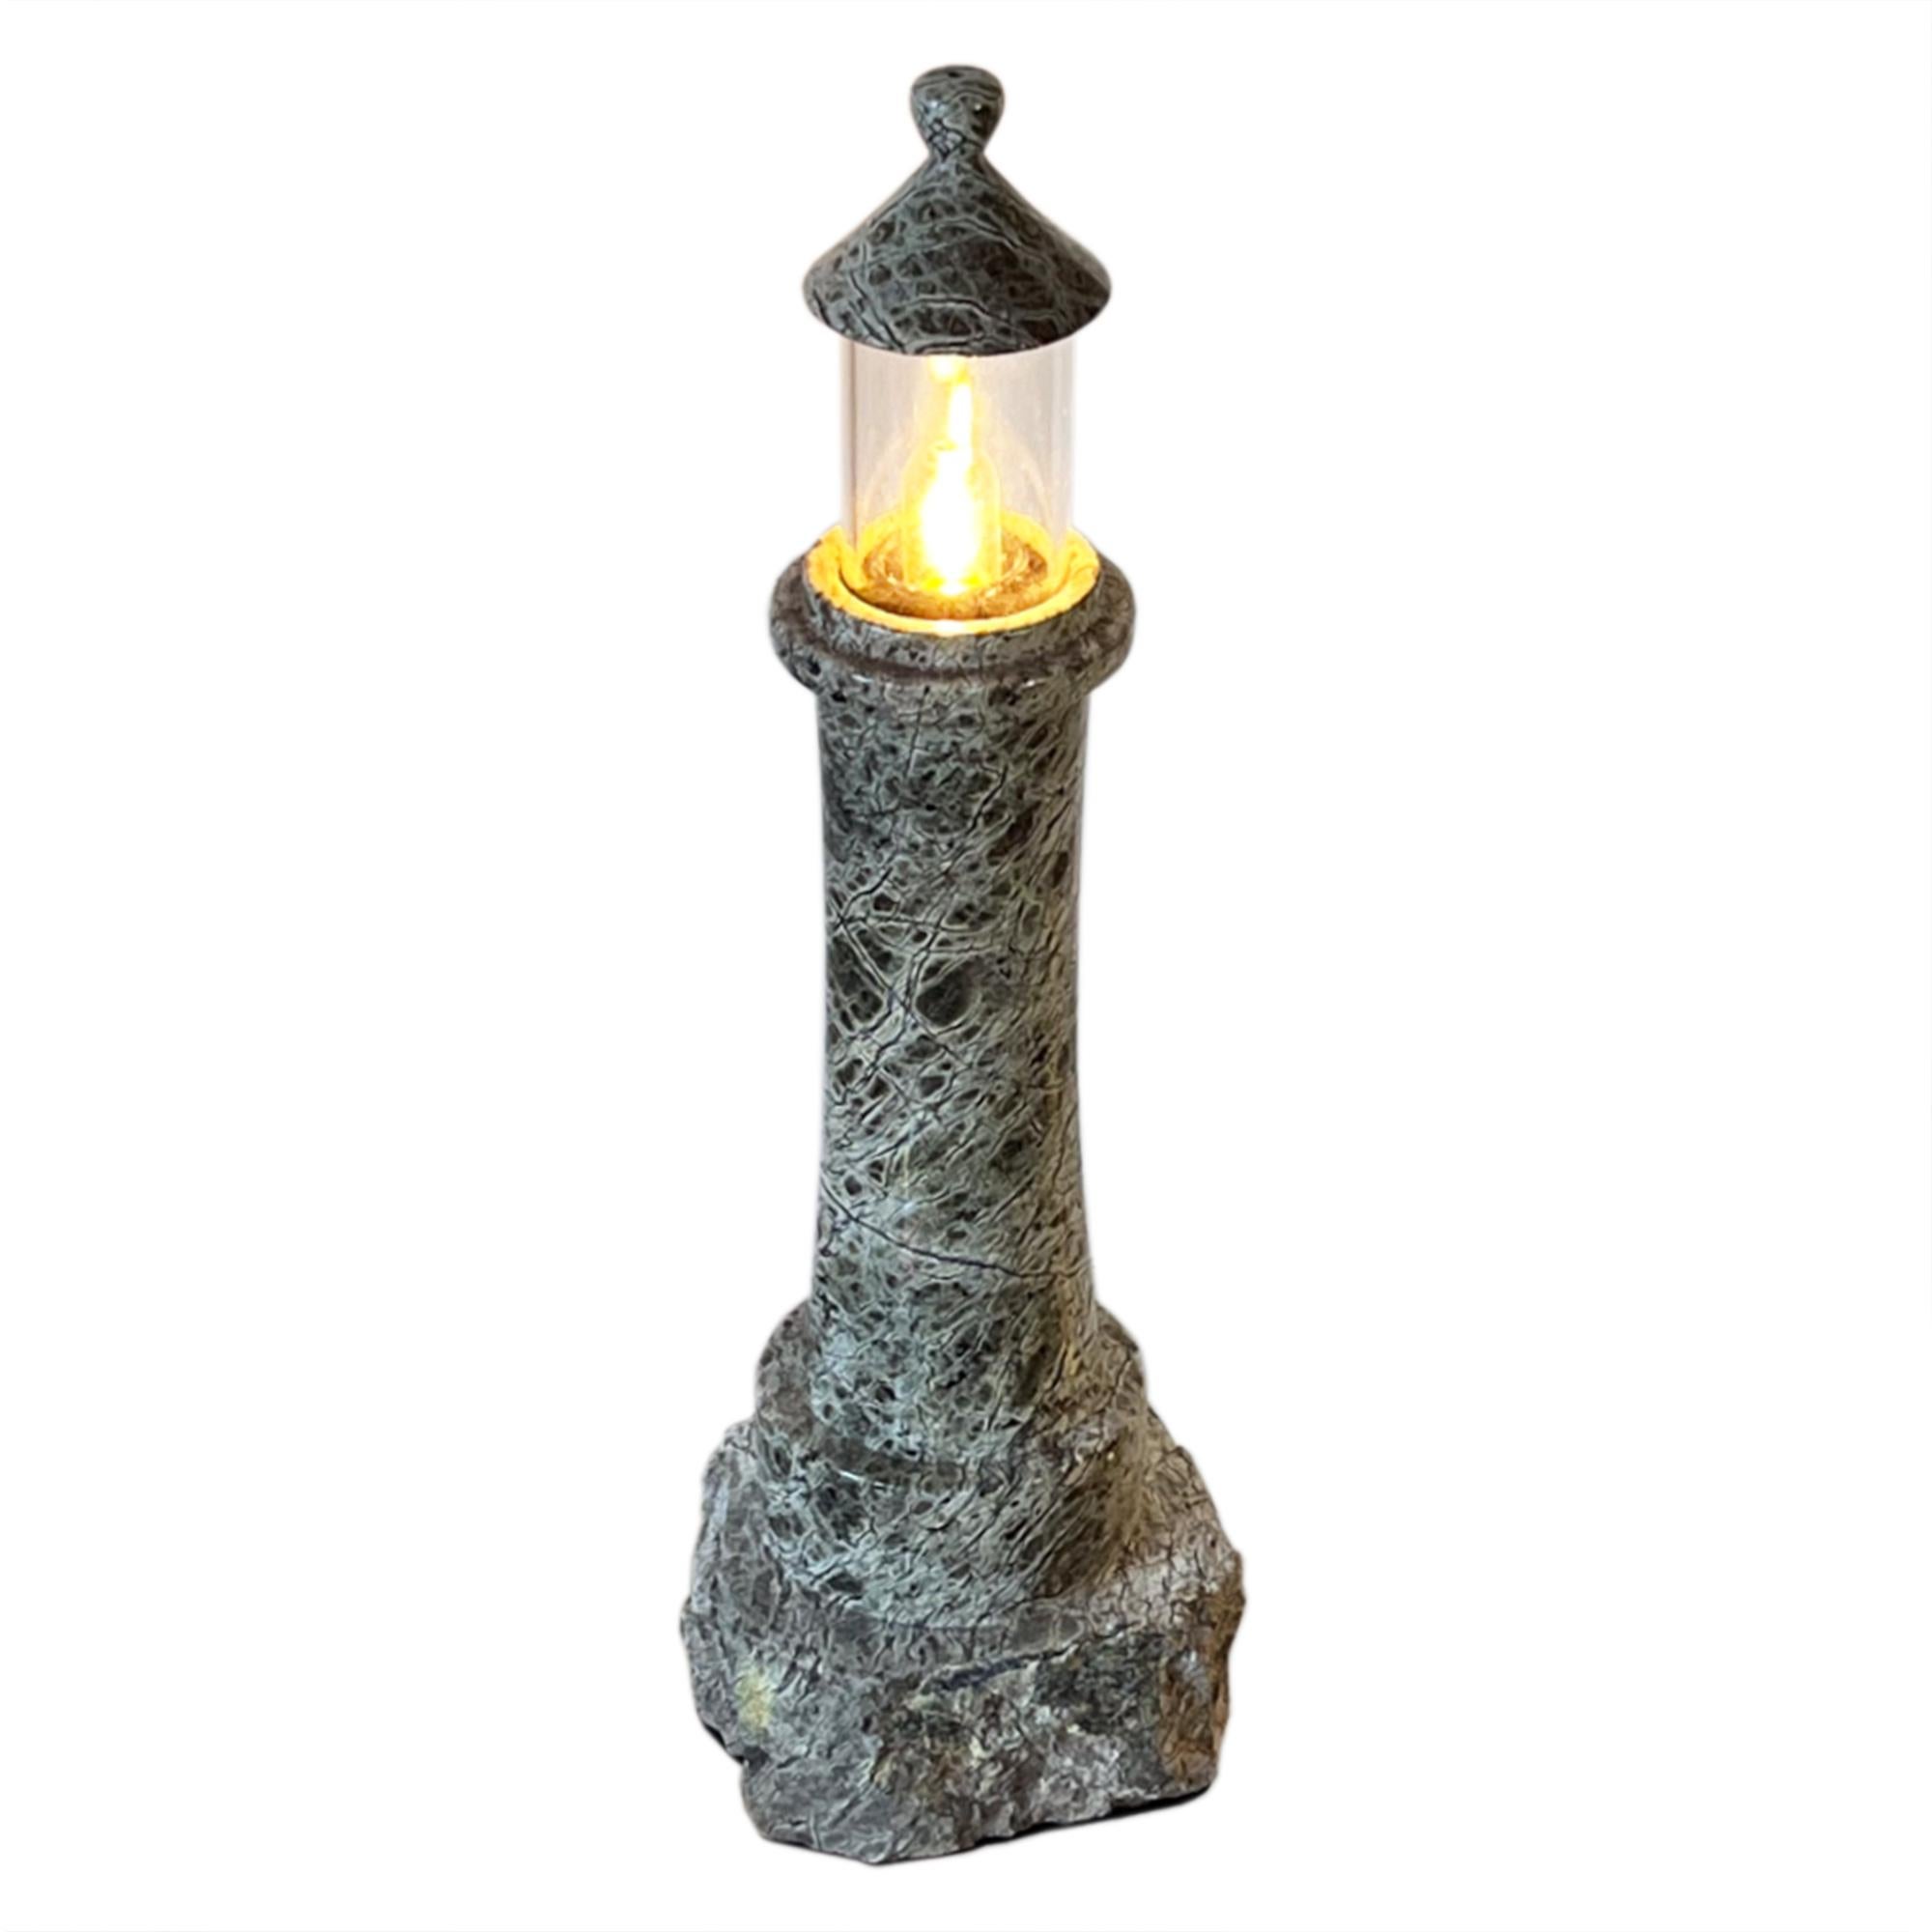 This table lamp is an iconic Cornish antiques. Hand crafted from the local Serpentine stone near The Lizard - the extraction of this rock is now very limited and only small items are now made. 

We currently have three of these table lamps for sale